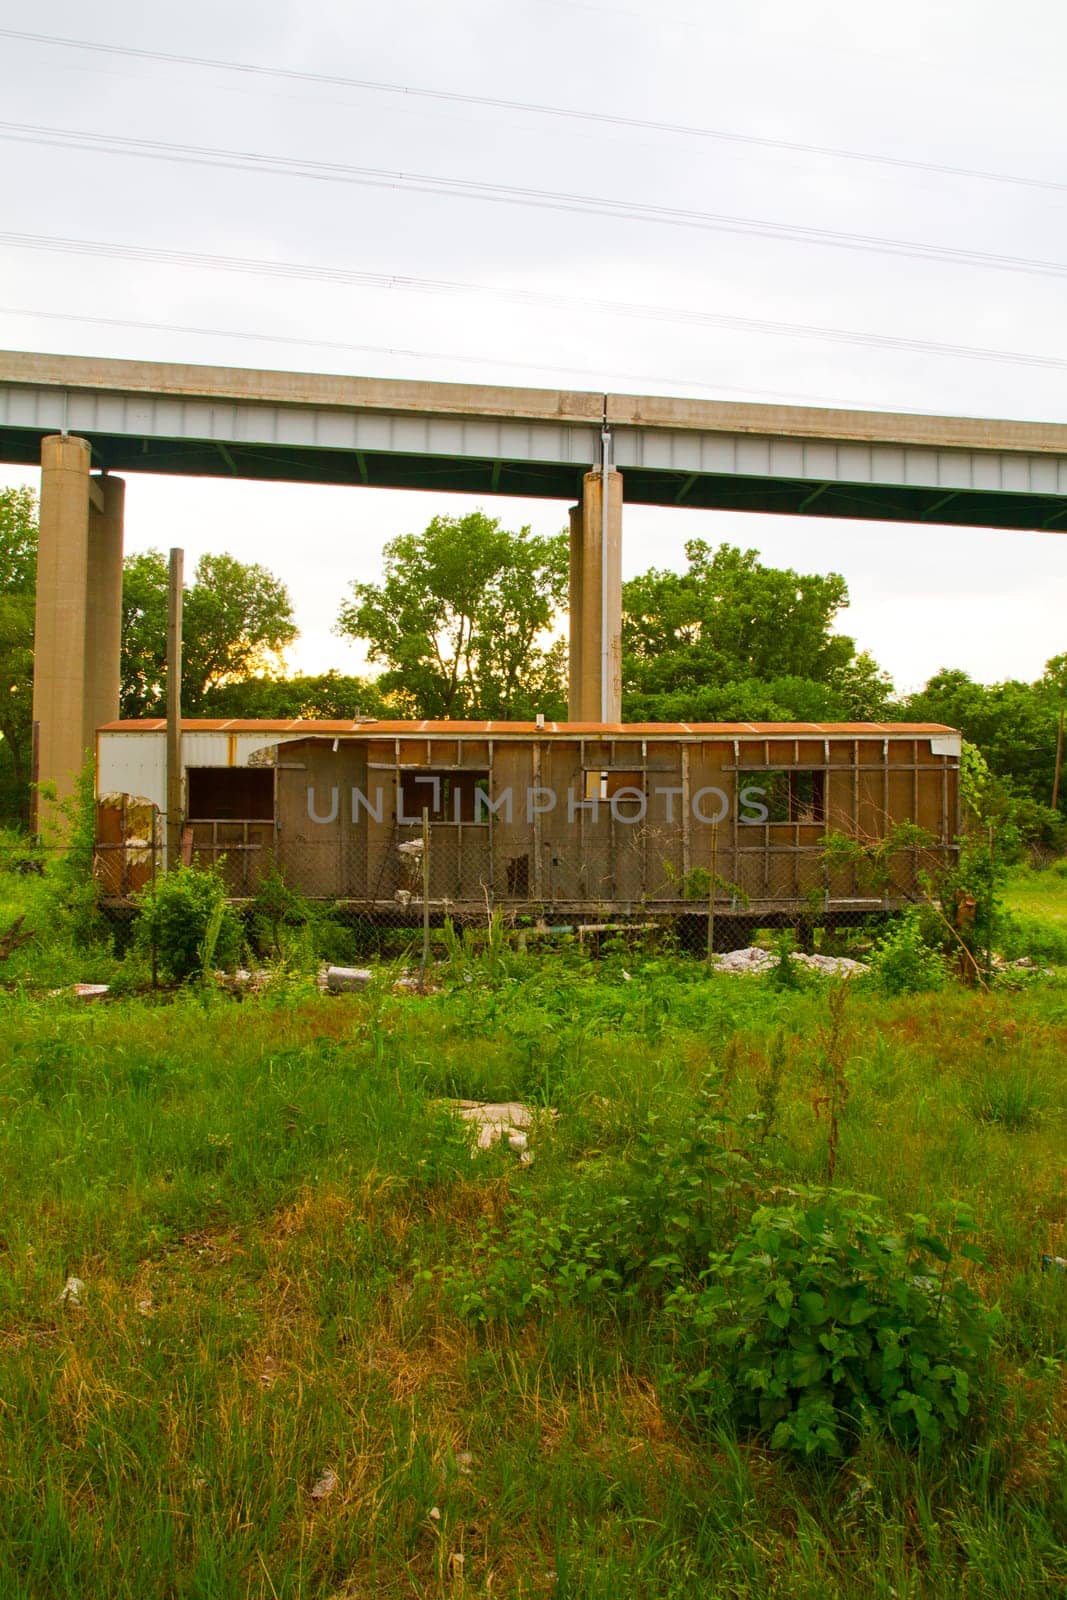 Desolate Urban Decay: Abandoned building overgrown with foliage in East St. Louis, Illinois, stands in stark contrast to a towering concrete bridge. Symbolizing the passage of time and the clash between nature and infrastructure.